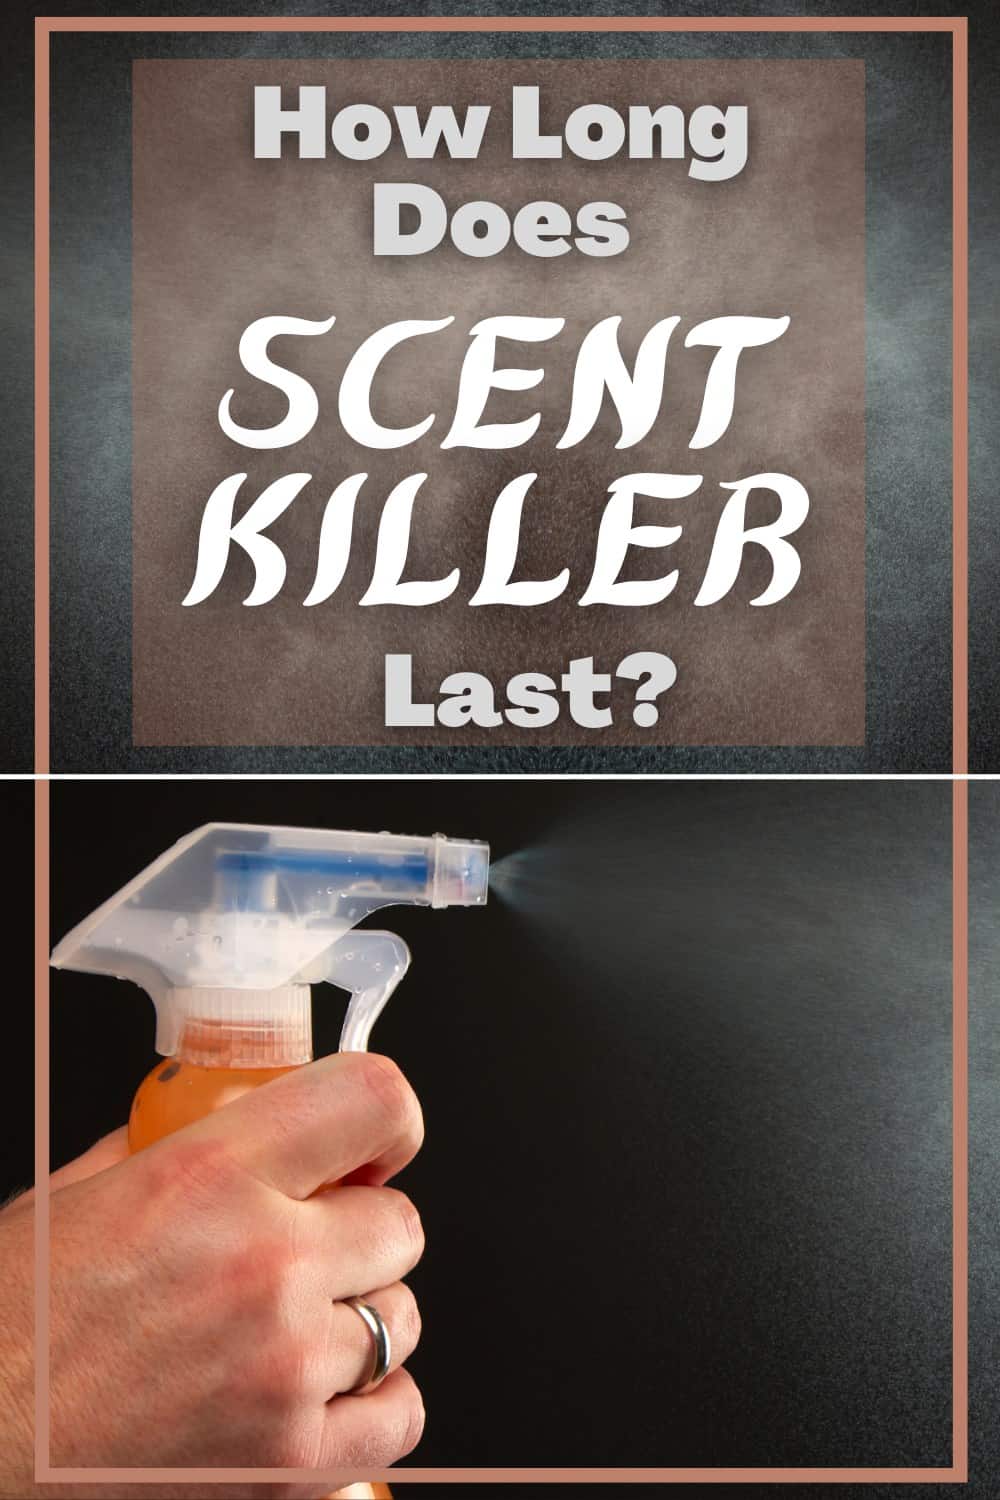 Scent killer can last up to 10 days on your clothes